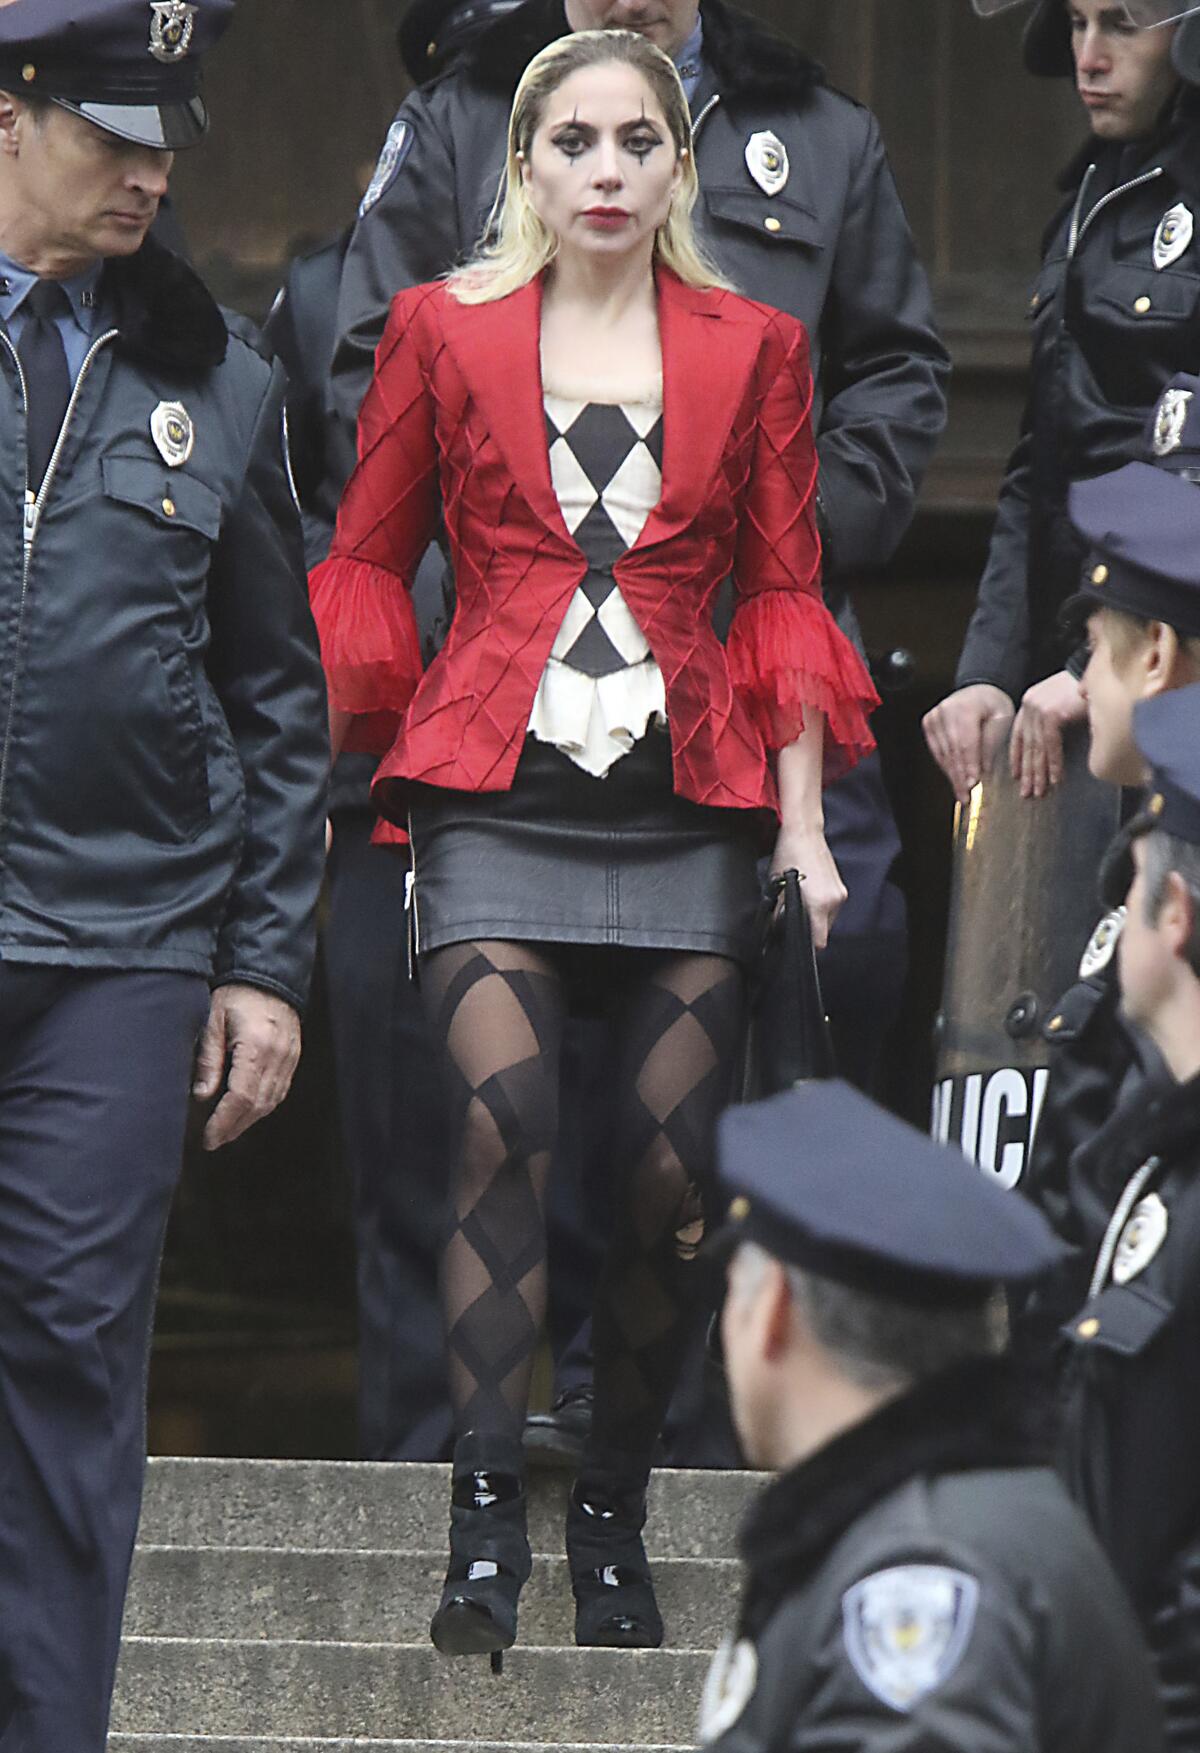 Lady Gaga wearing face paint, a patterned shirt and a red jacket while walking through a crowd